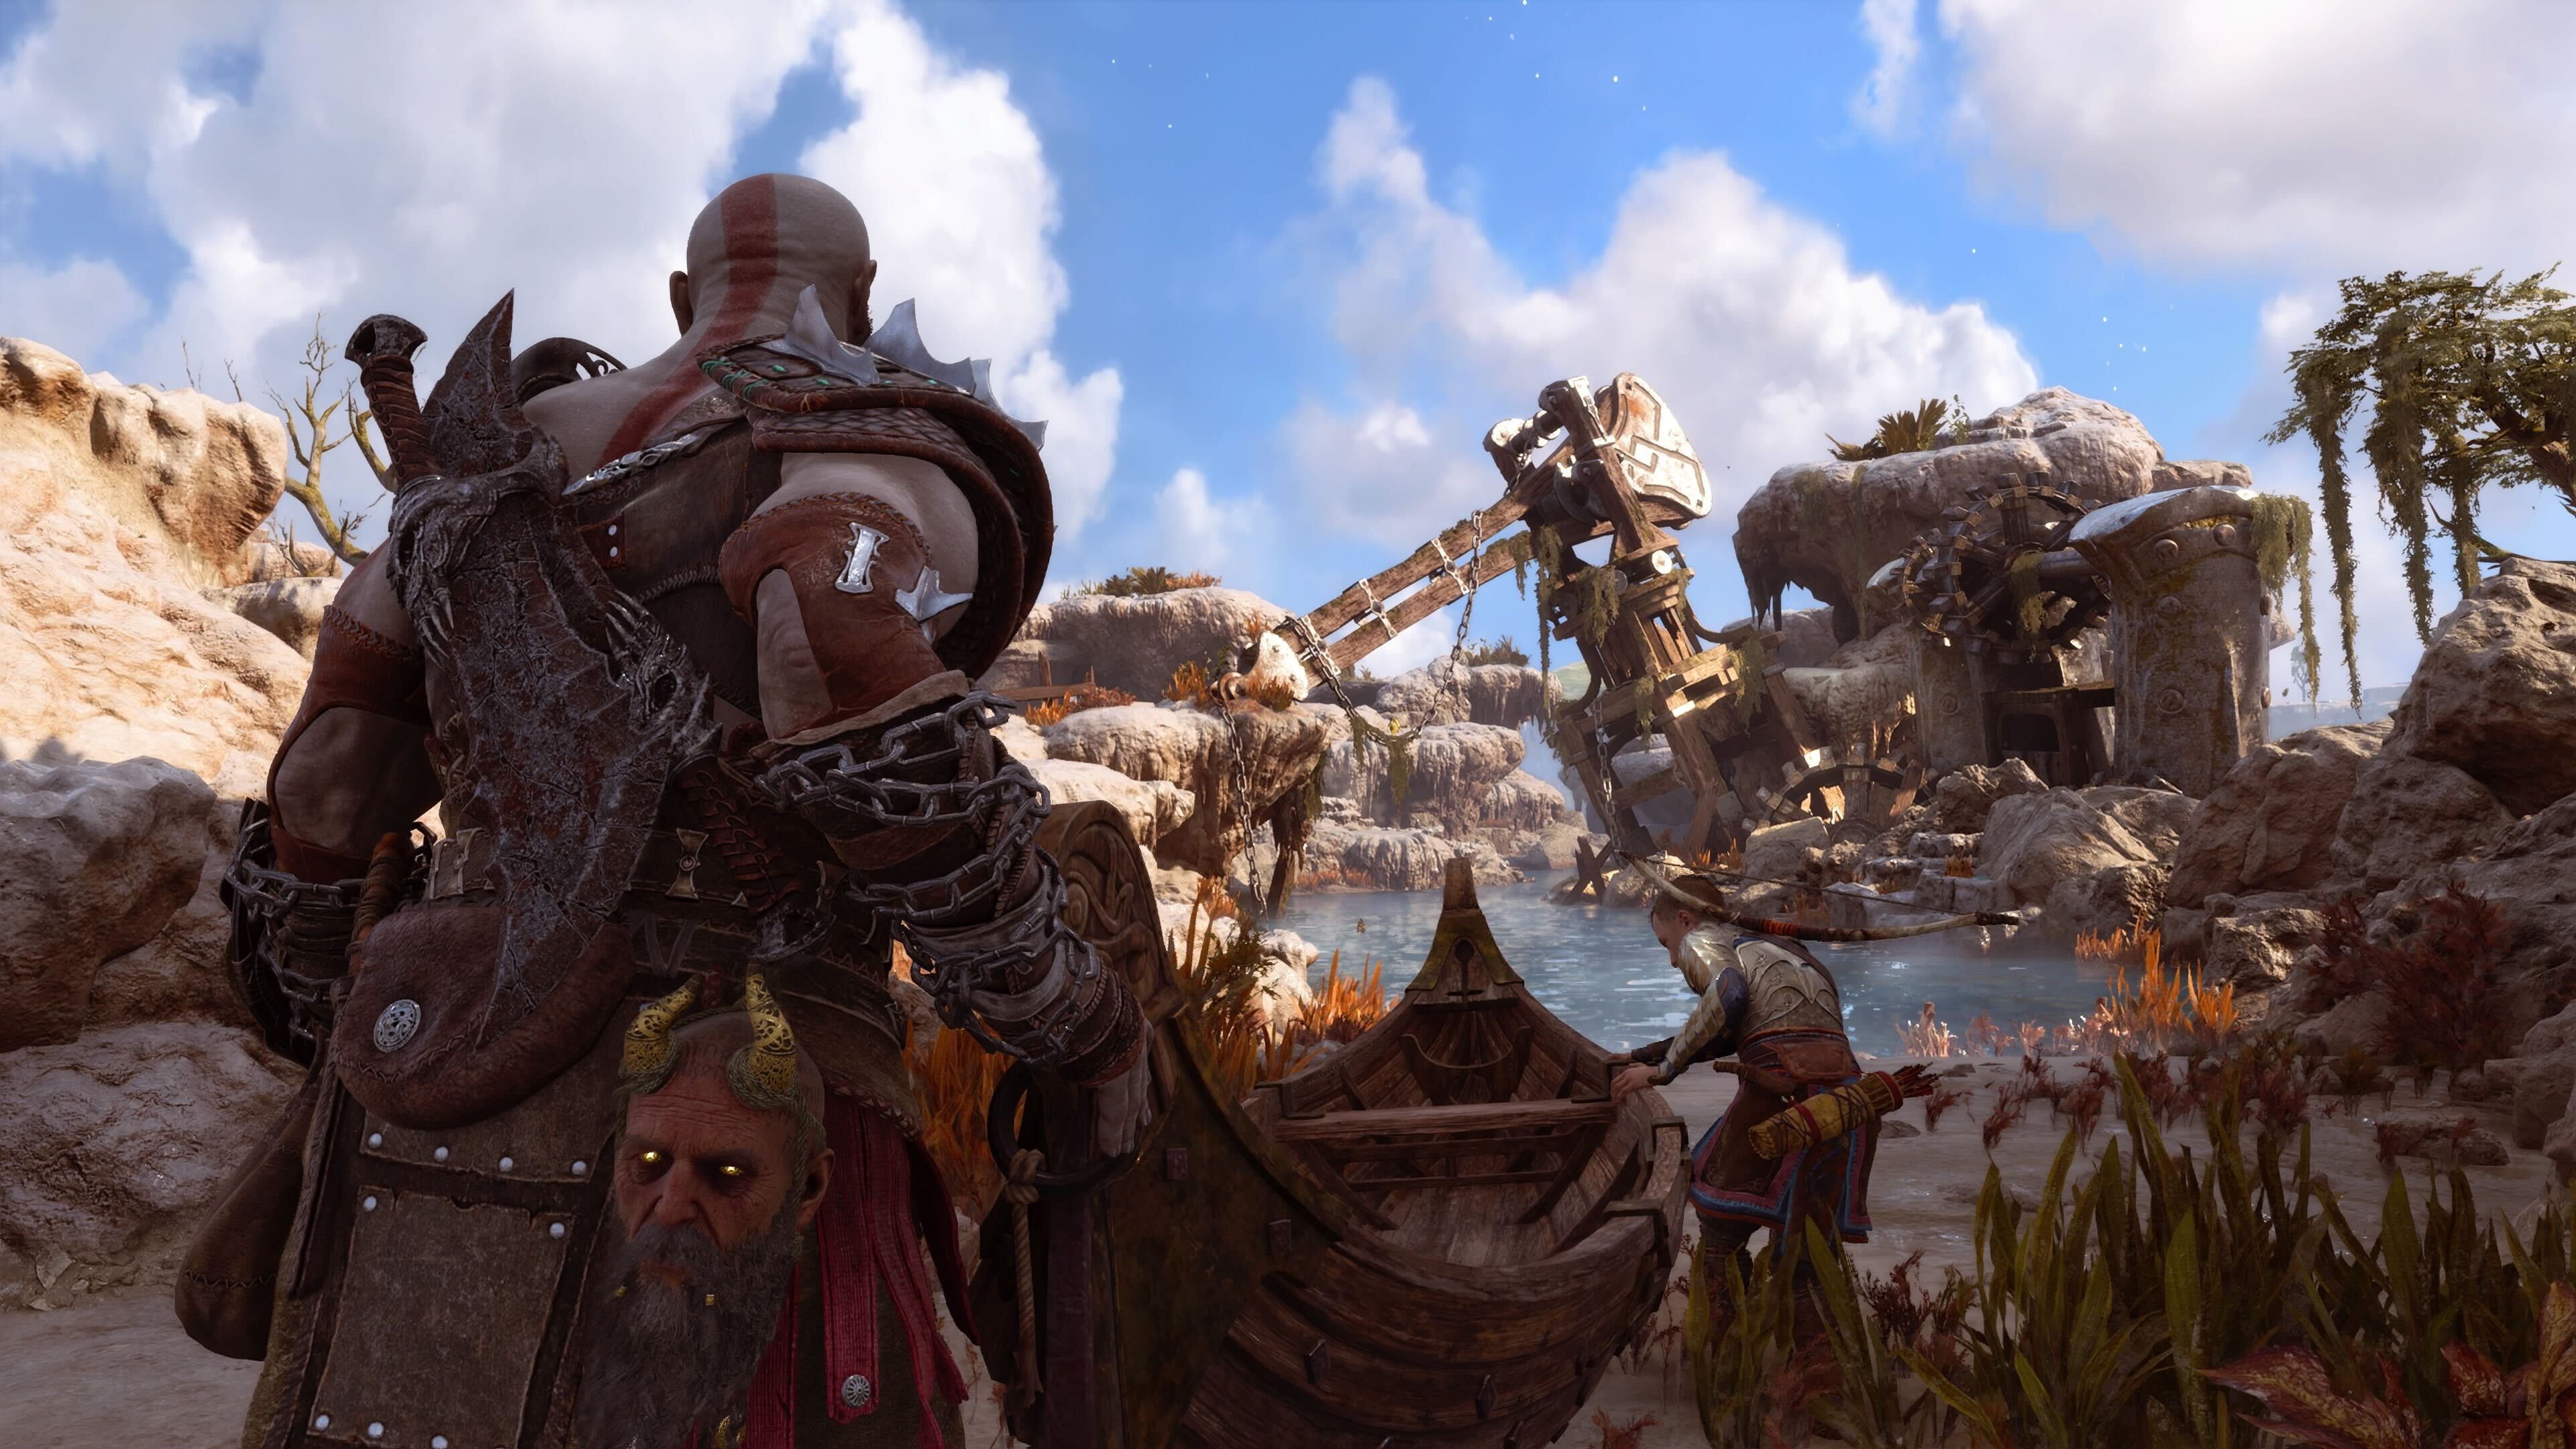 God of War Ragnarok Made to be the “Best PS4 Game”, PS5 Features